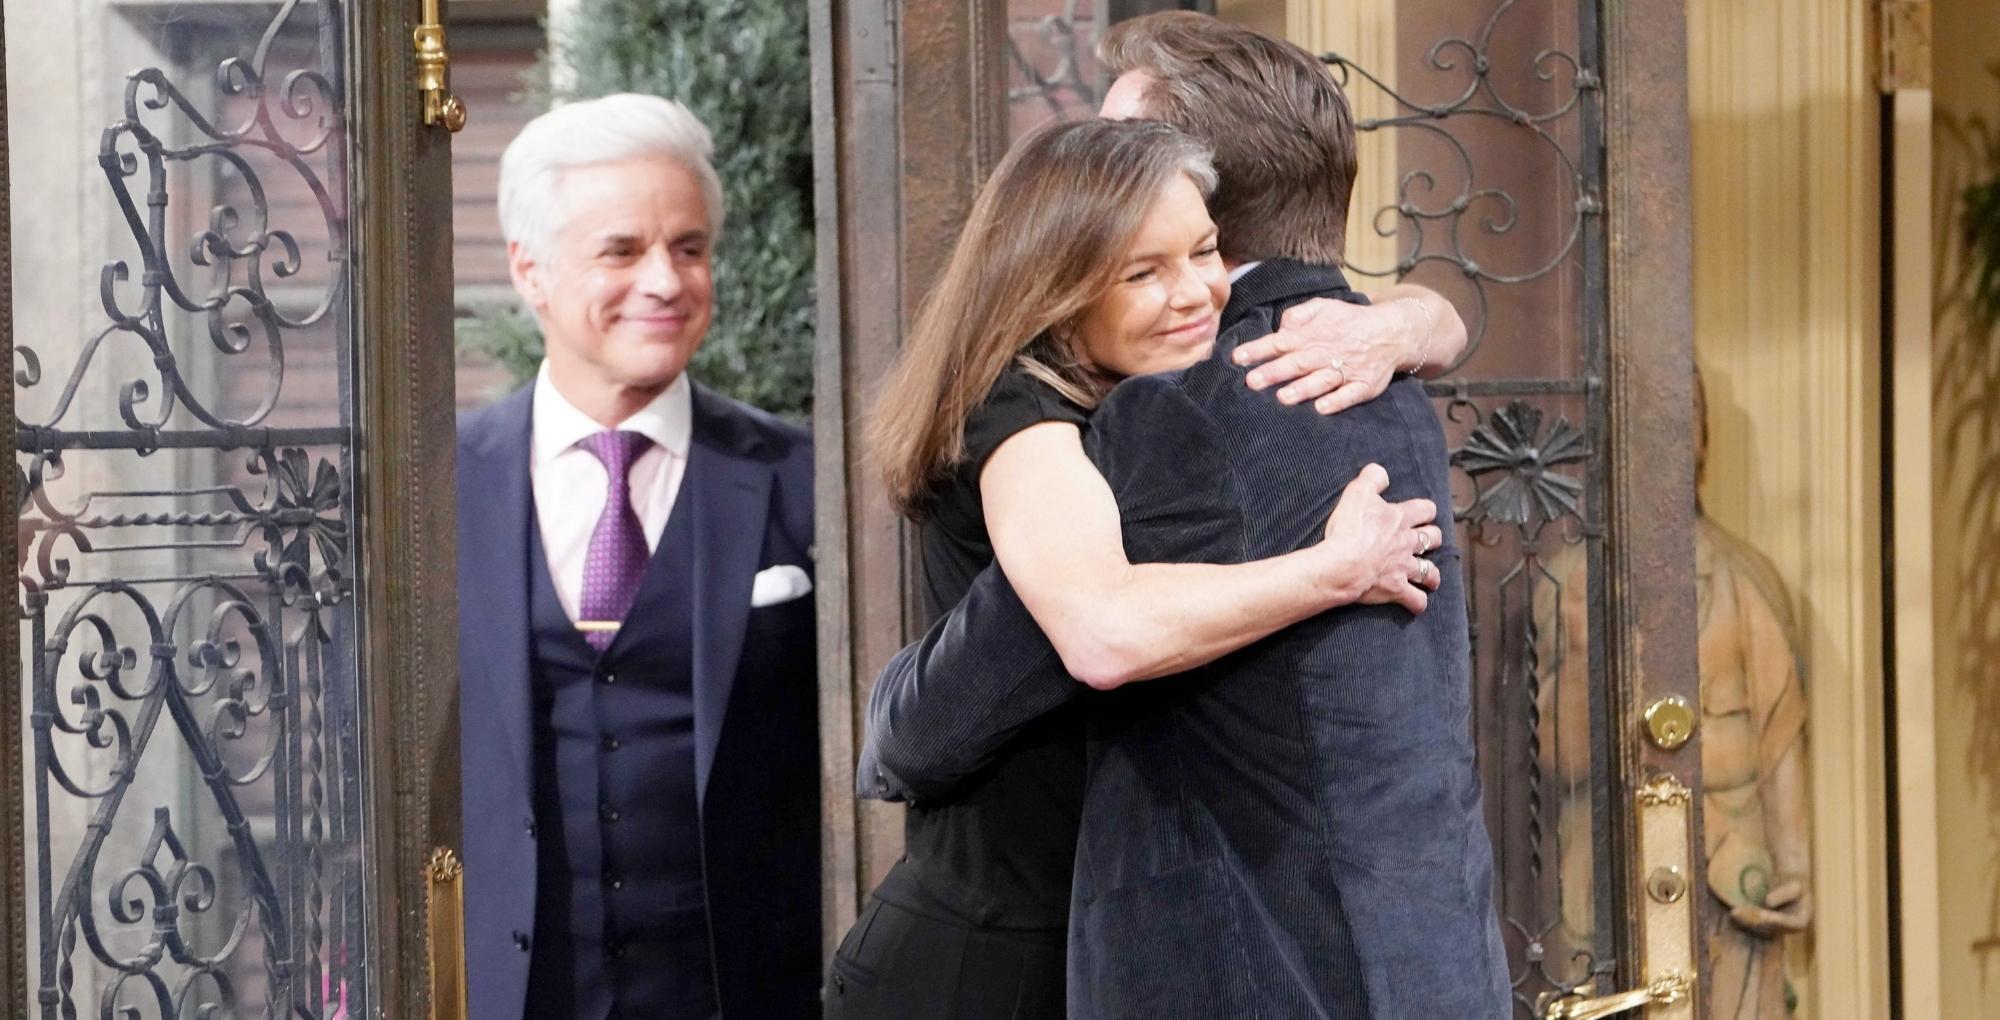 the young and the restless spoilers for may 4, 2023, have diane getting hugged by kyle while michael looks on.